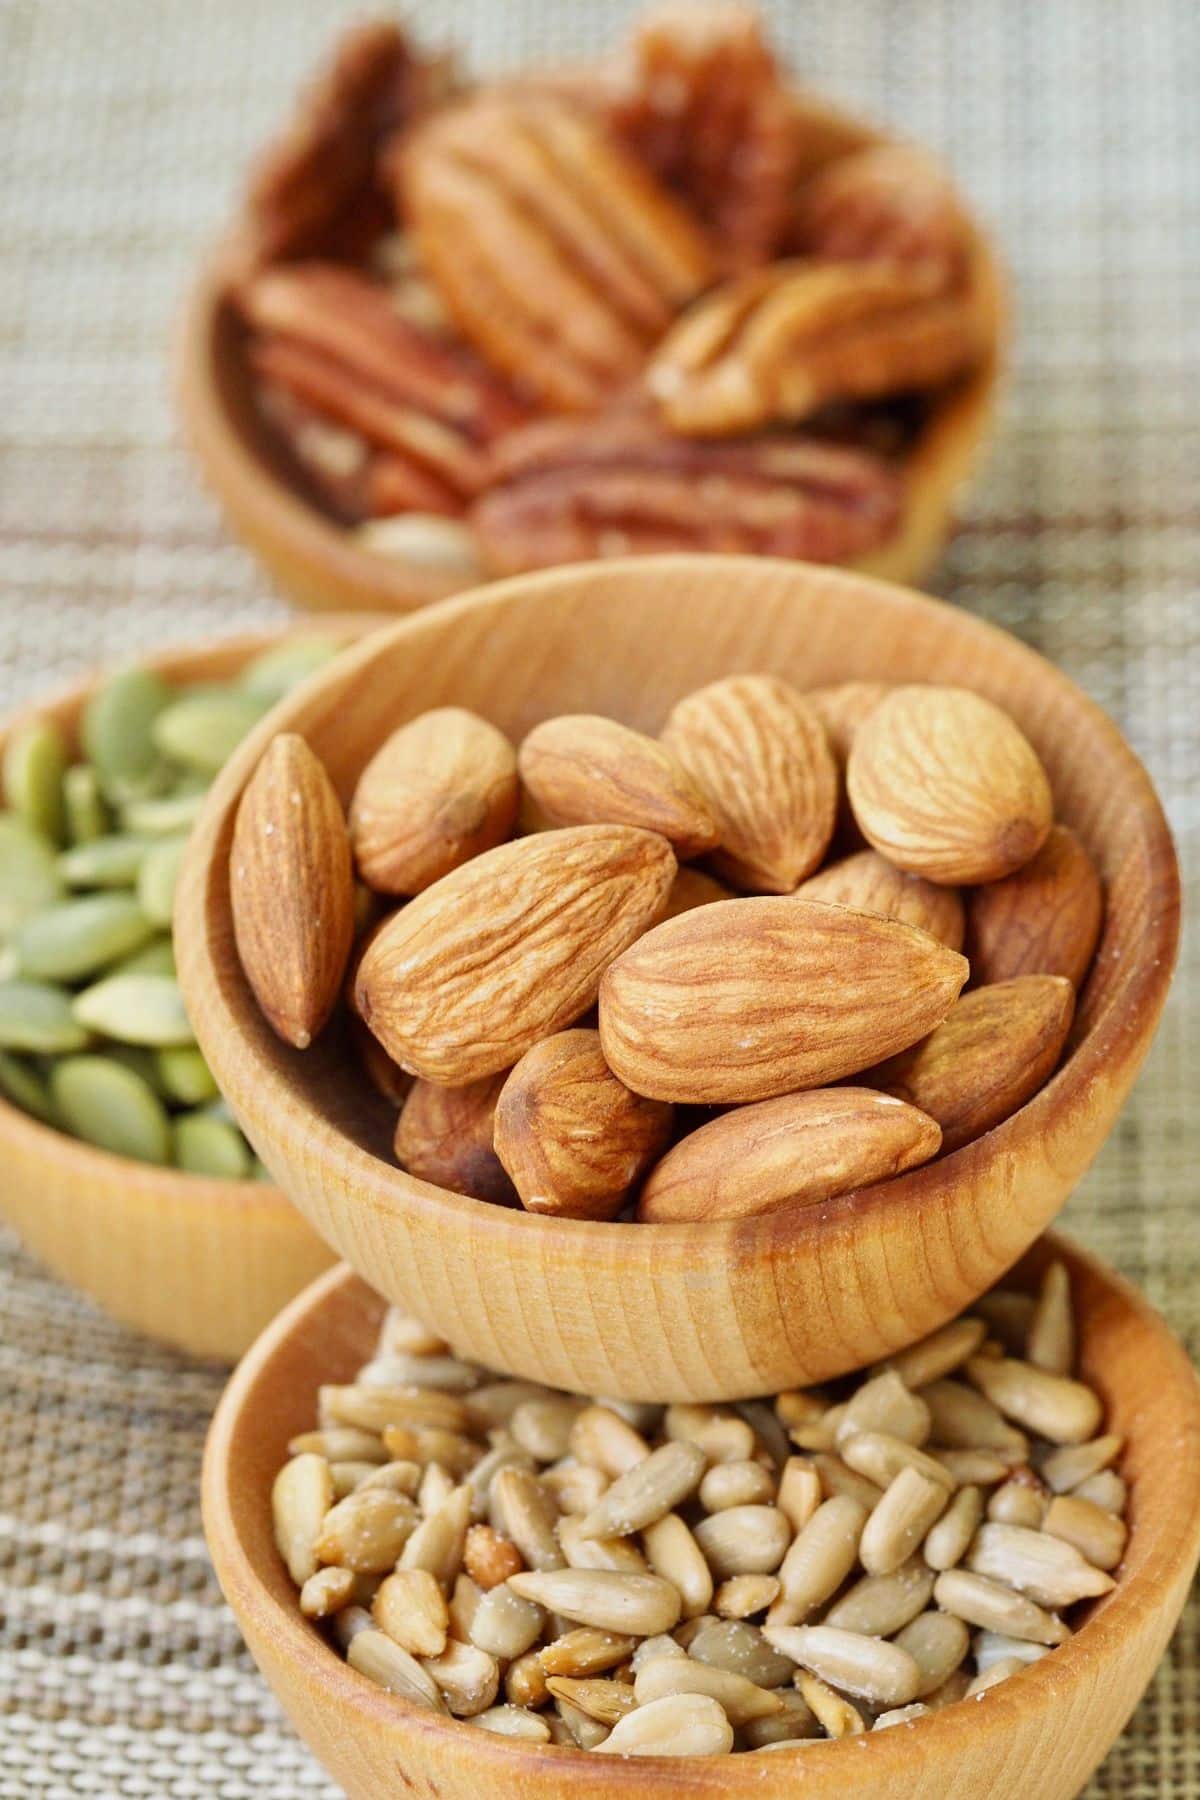 four bowls of different types of nuts and seeds.